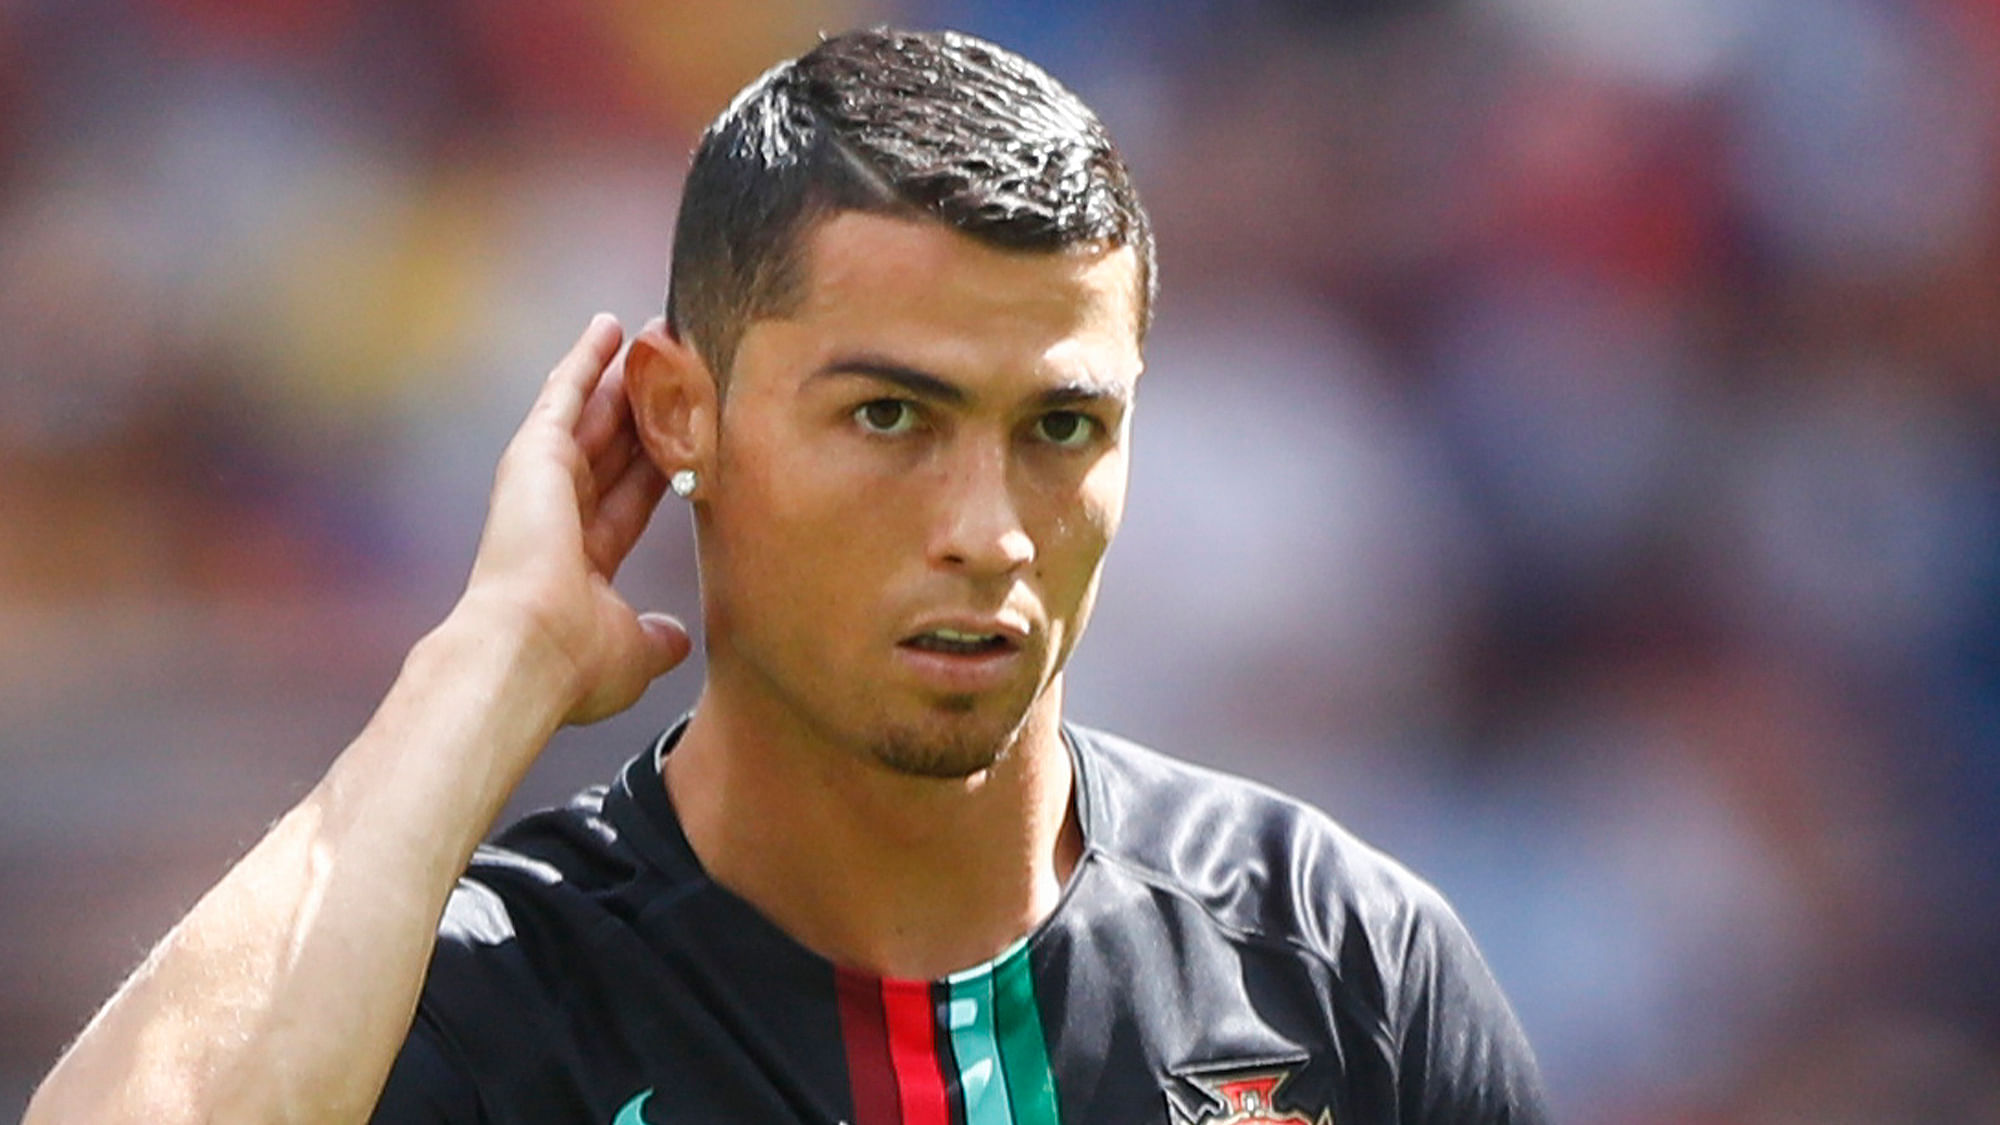 FIFA World Cup 2018: Ronaldo’s Portugal are playing Morocco.